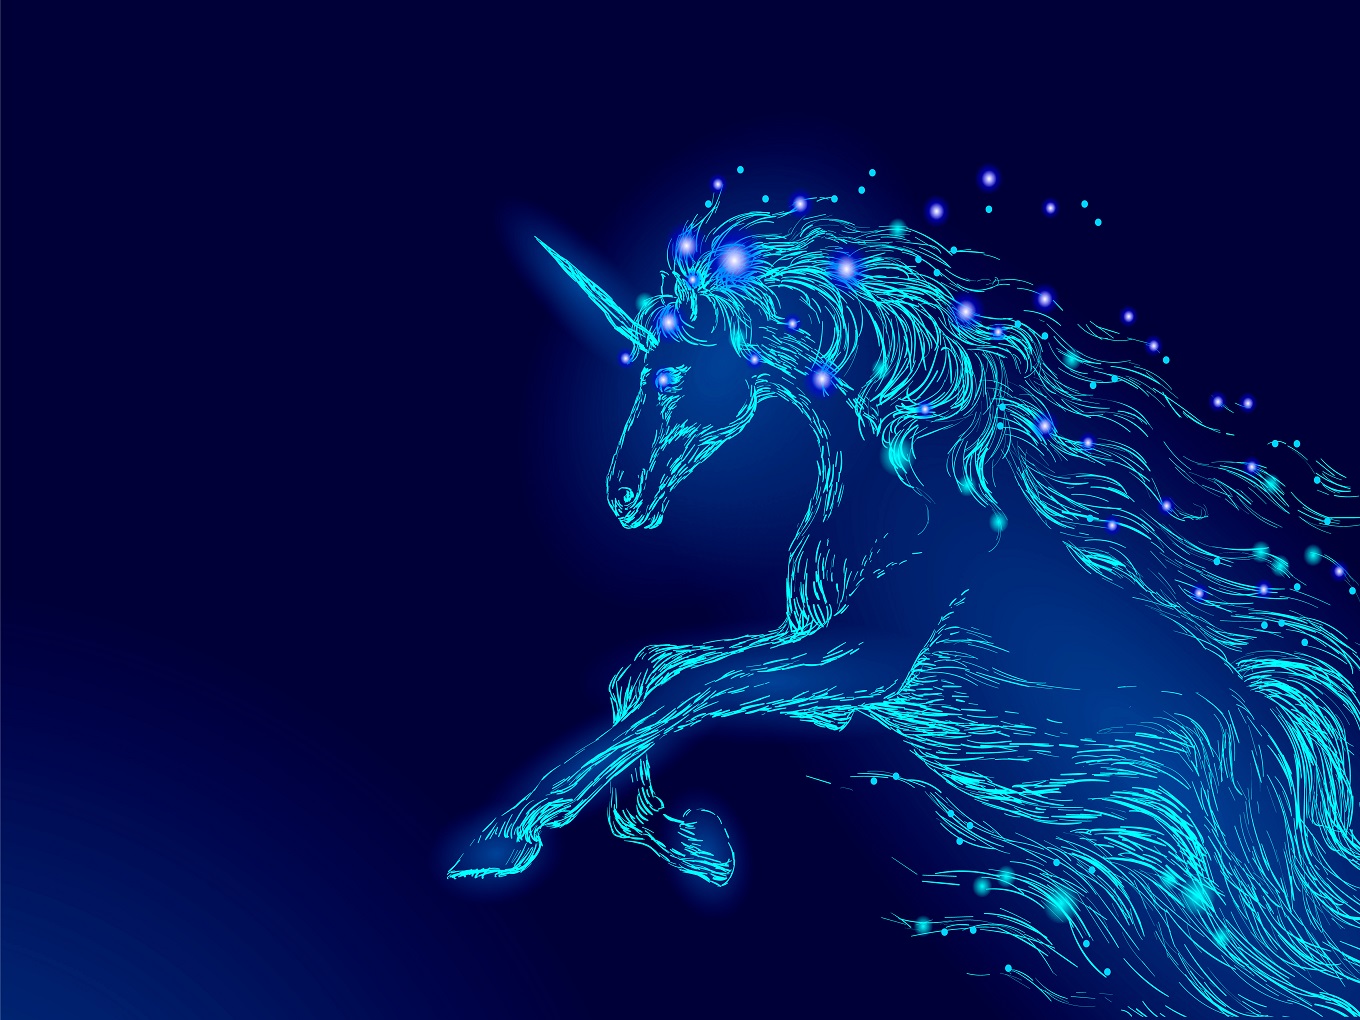 Wealth Management Platform Upstox Likely To Join The Unicorn Club At $3 Bn Valuation